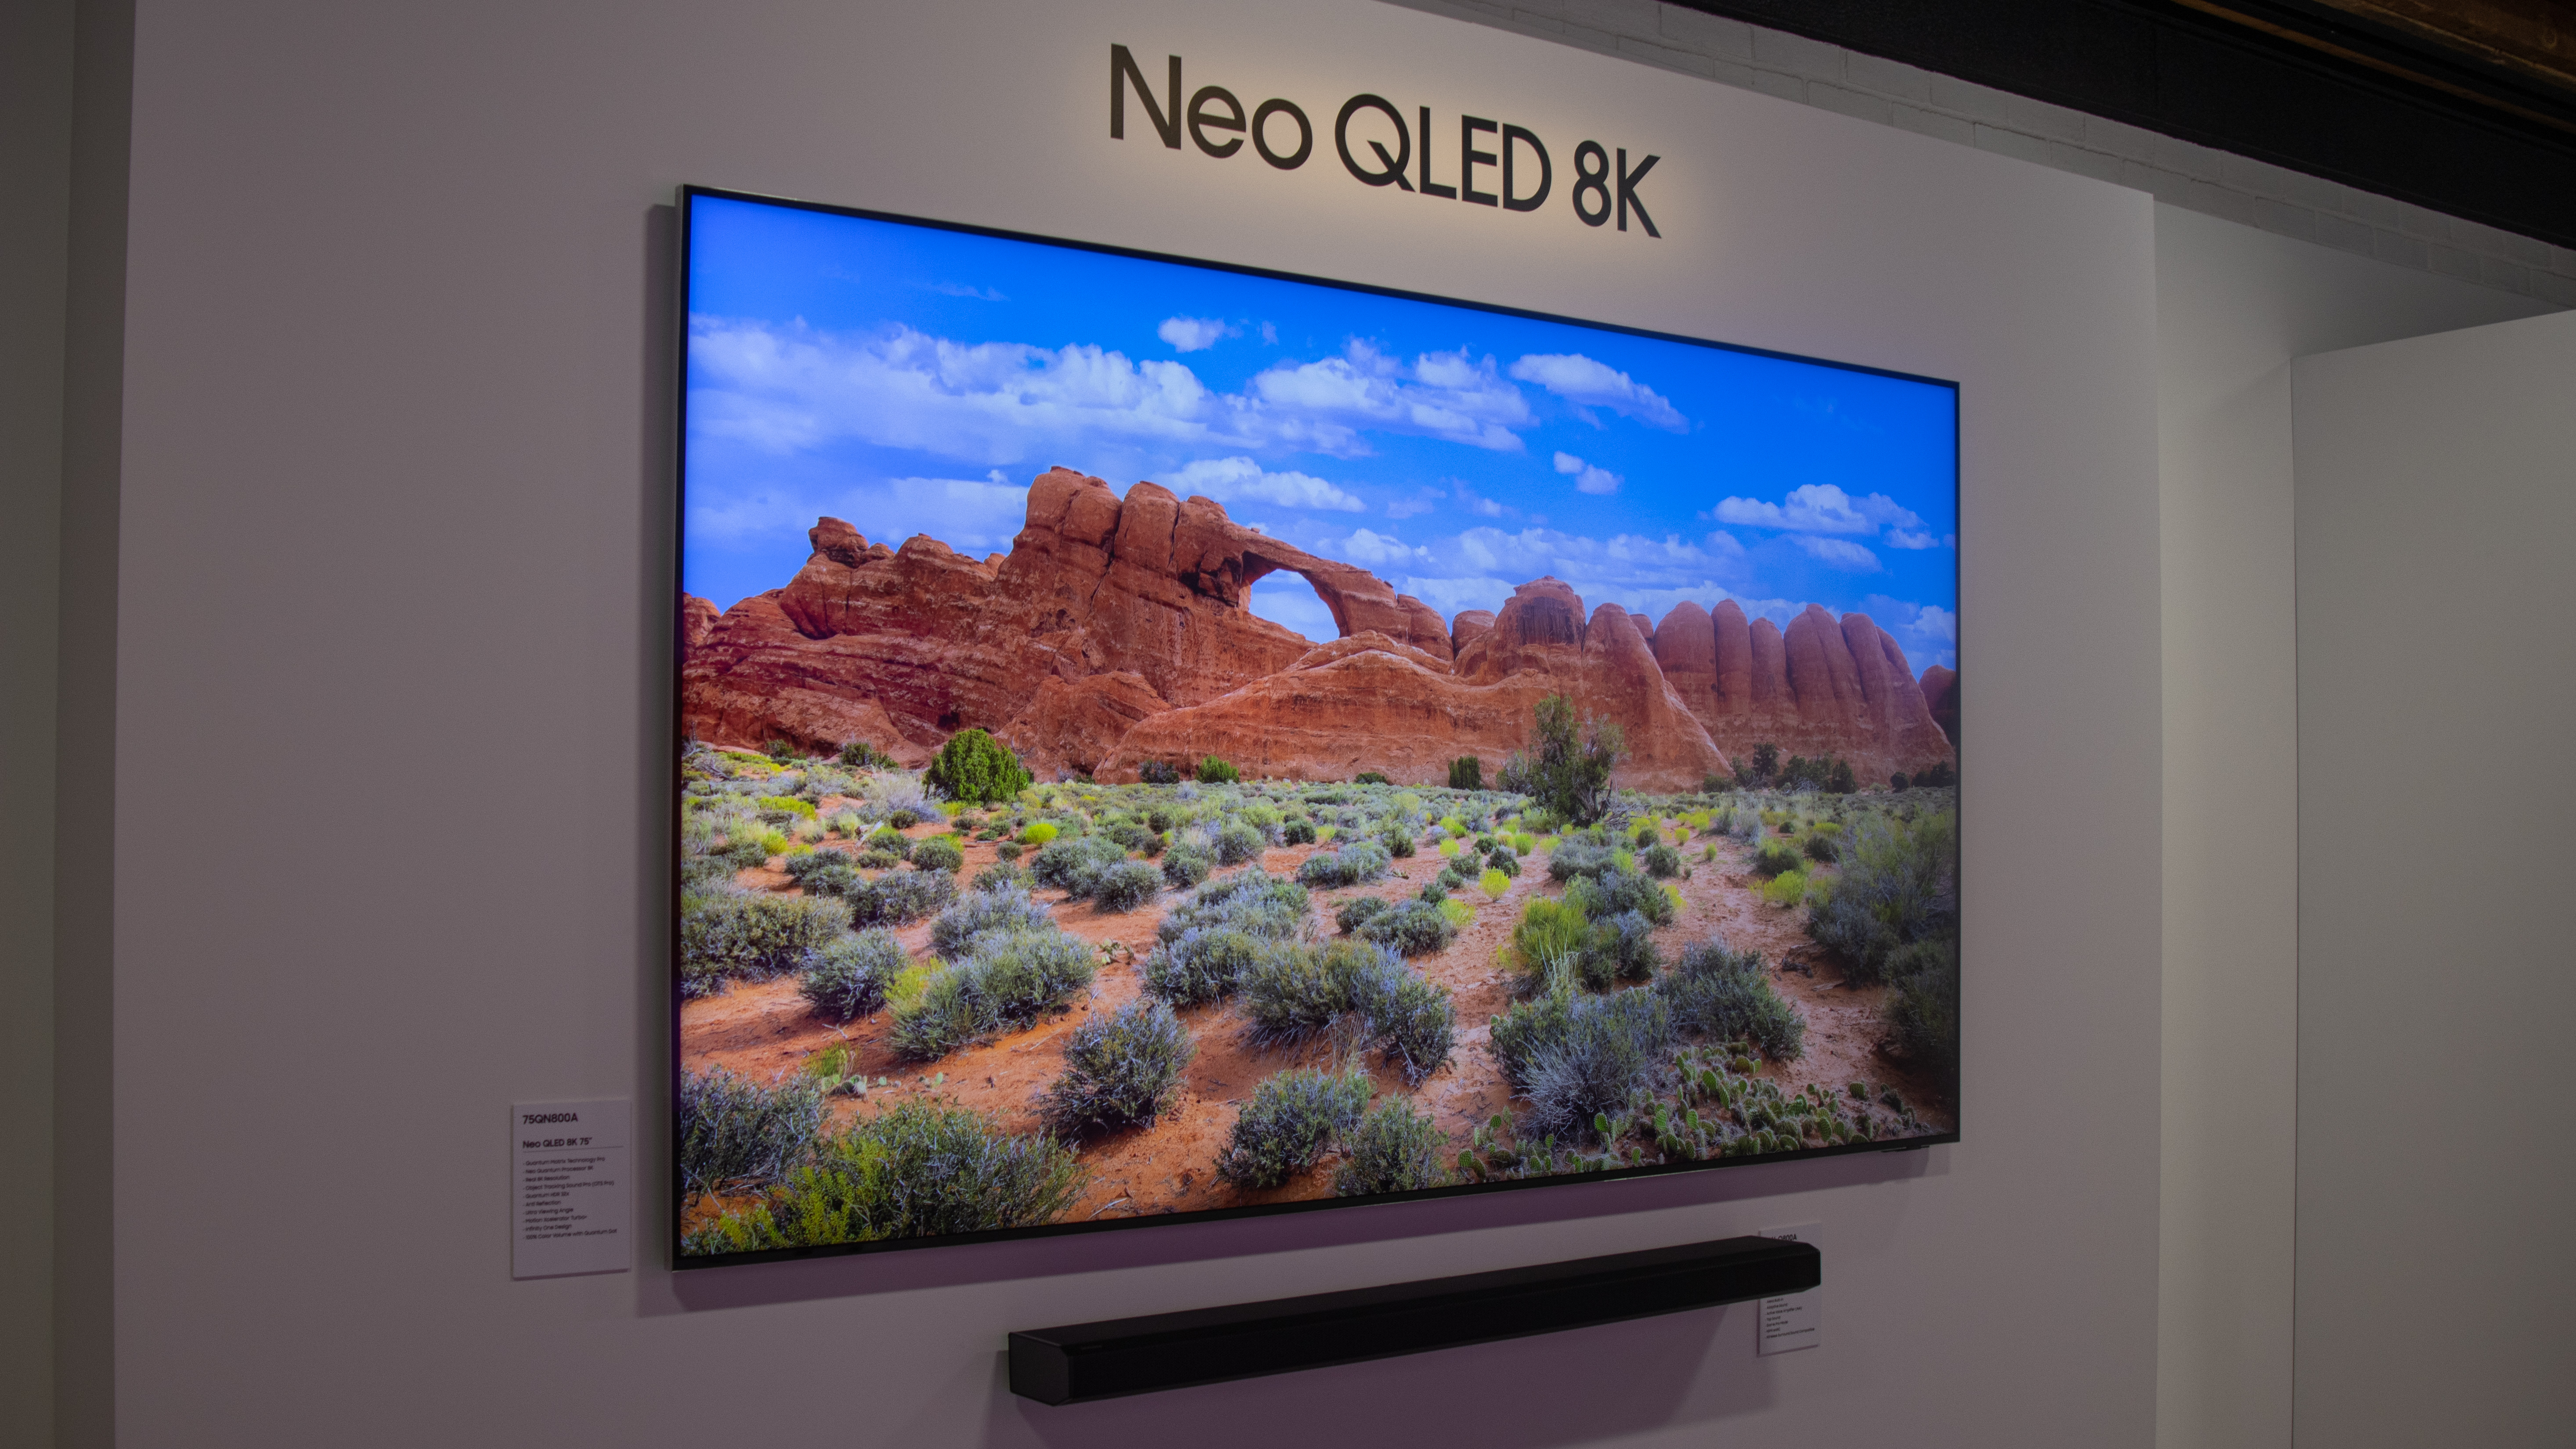 Samsung Neo QLED 8K, Neo QLED Premium TV Models Launched in India: Price,  Specifications